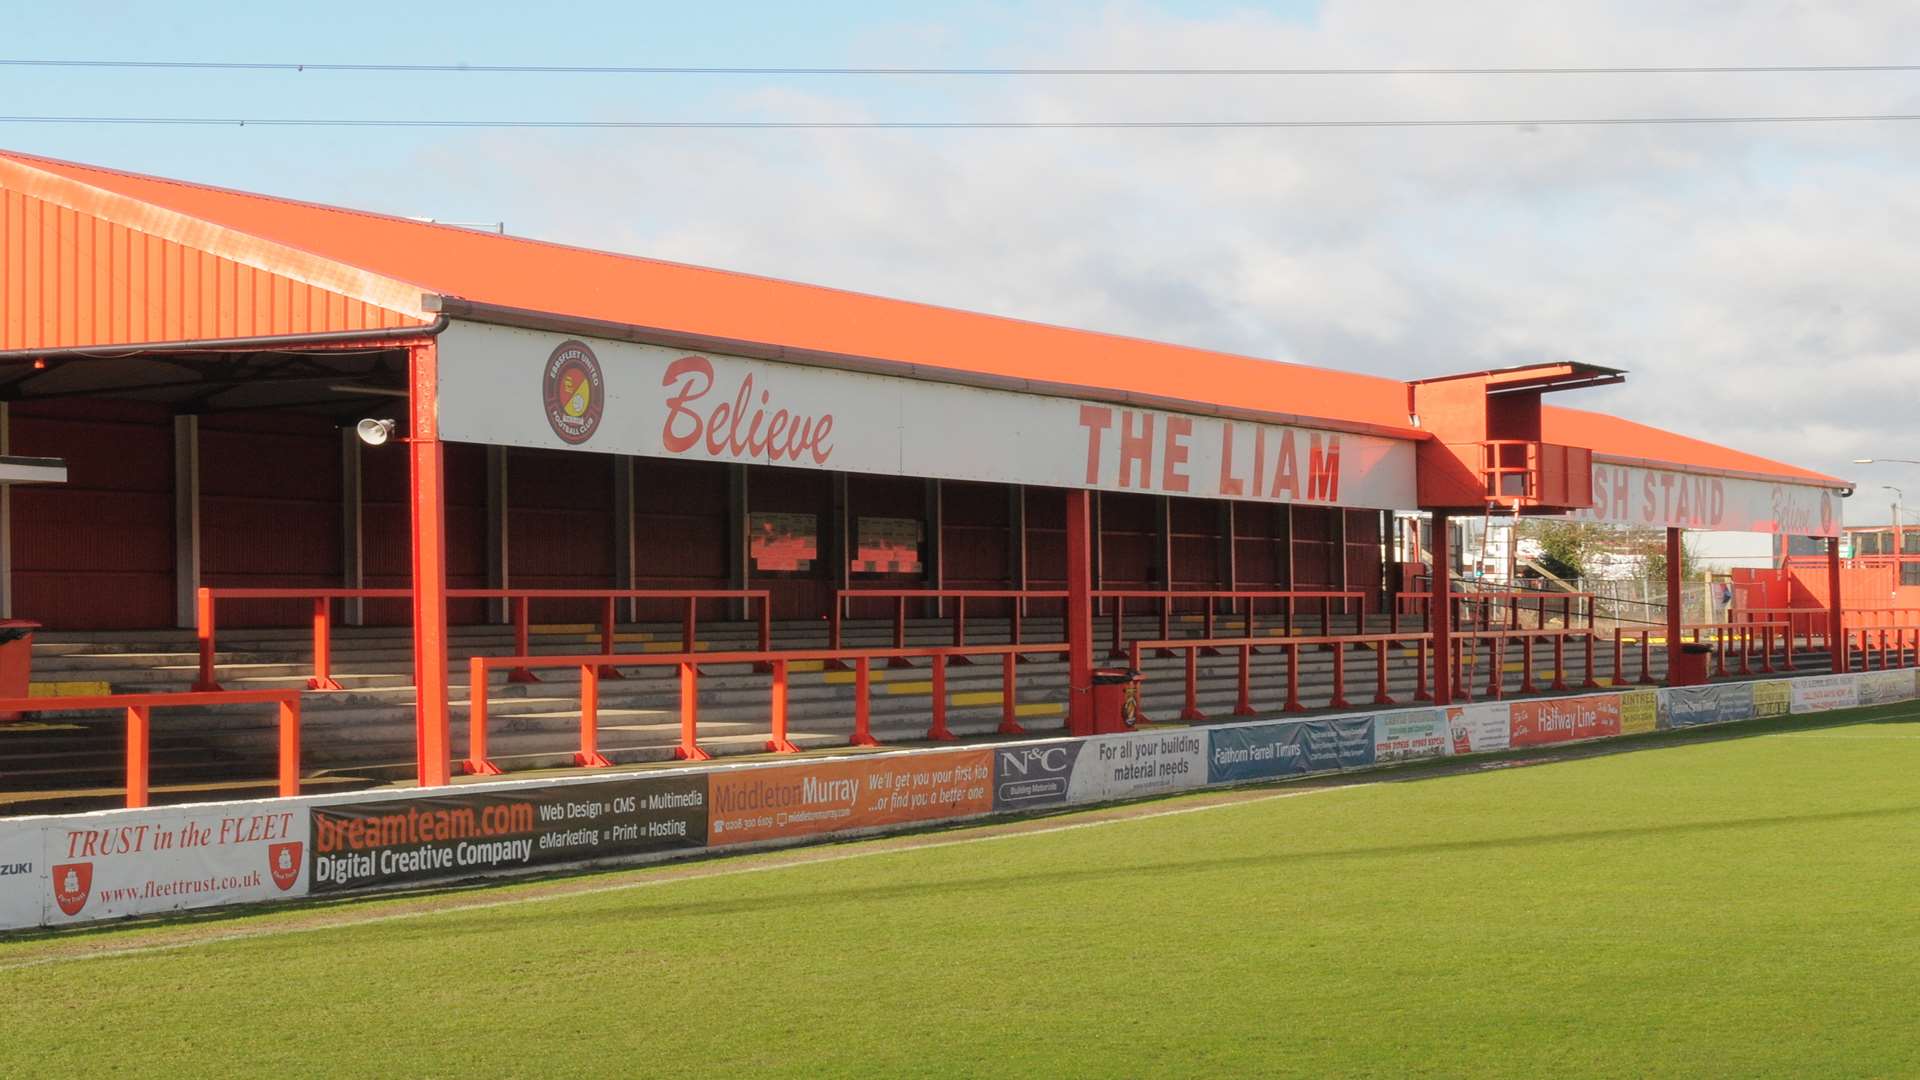 Ebbsfleet's new main stand will replace the existing Liam Daish Stand Picture: Steve Crispe